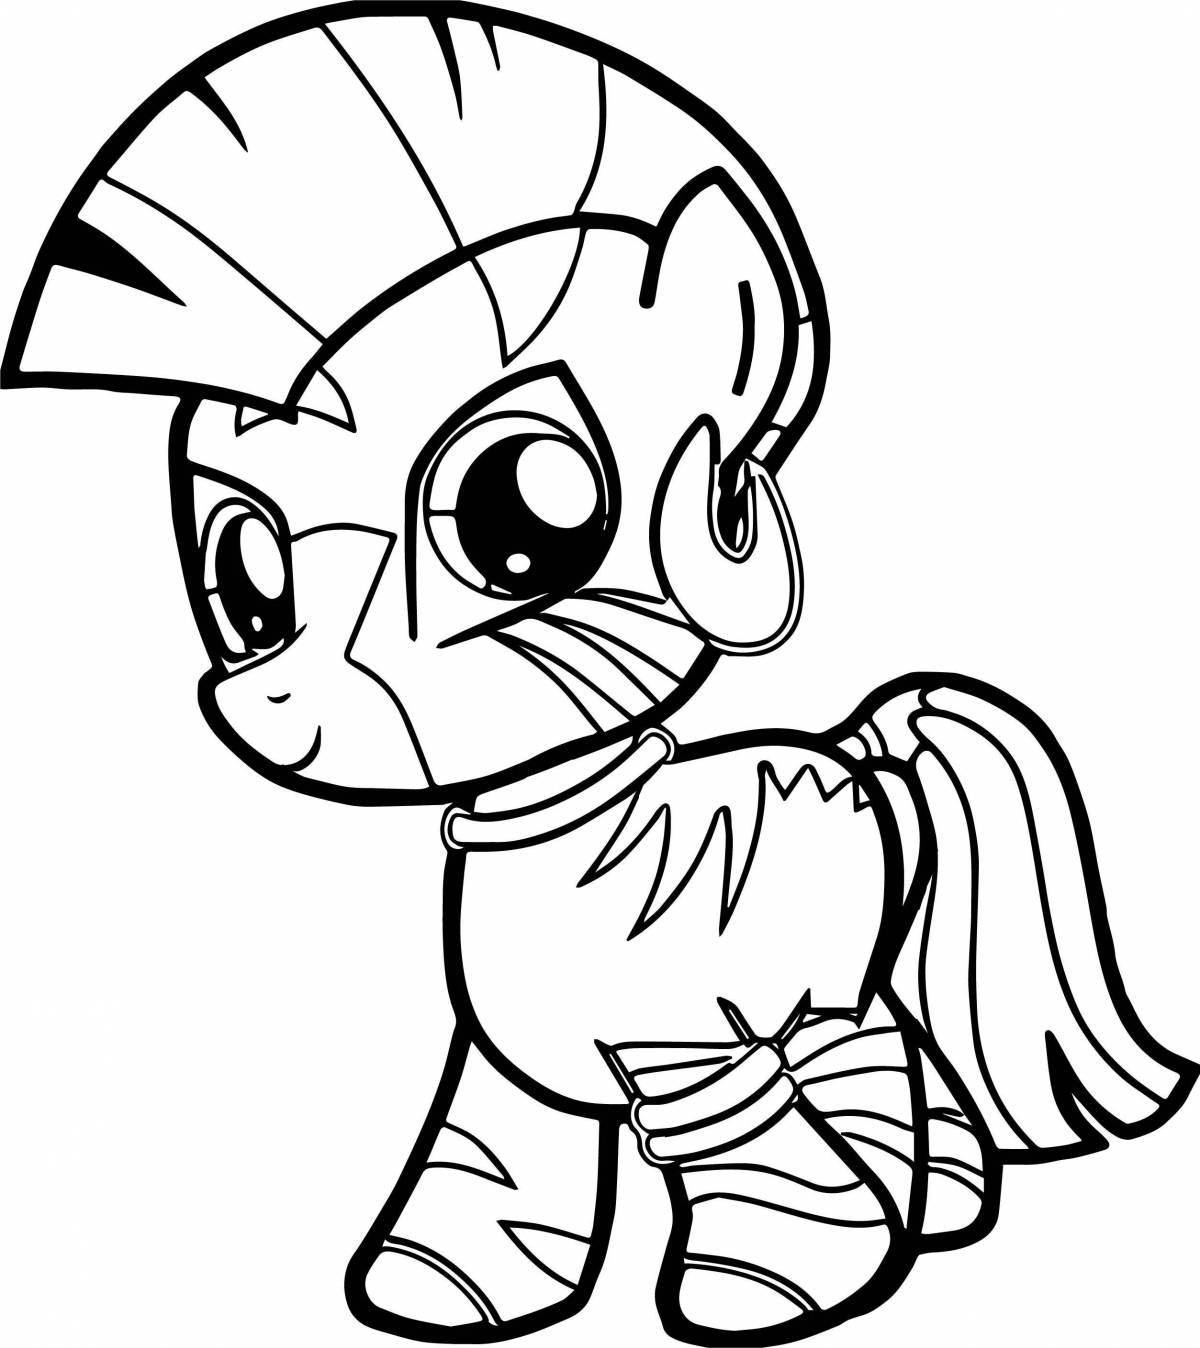 Spike pony coloring page